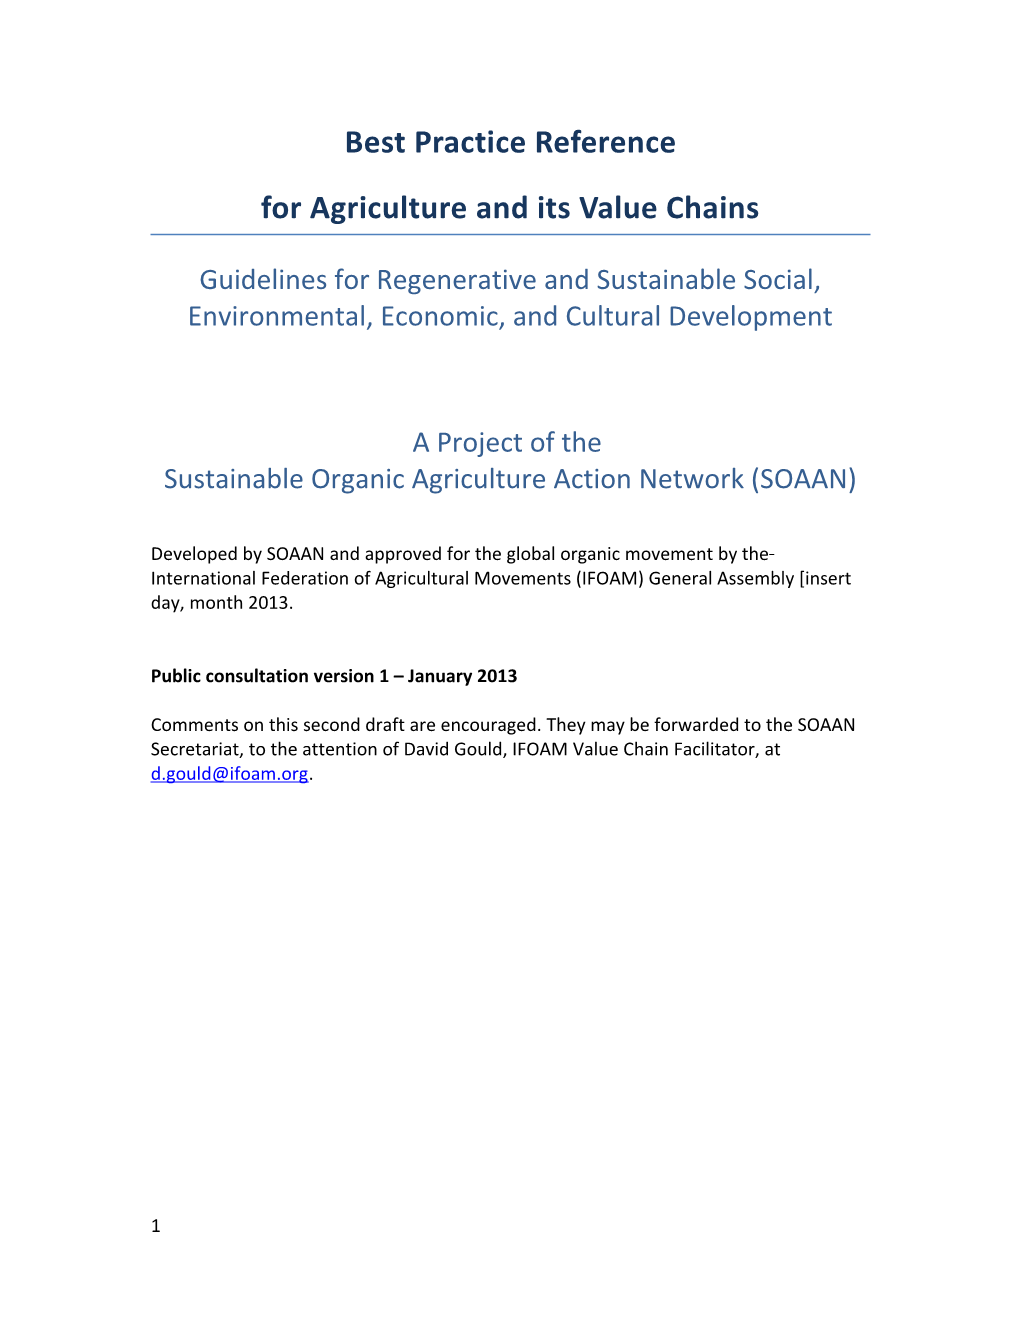 Best Practices For Sustainability In Agriculture And Its Associated Value Chains